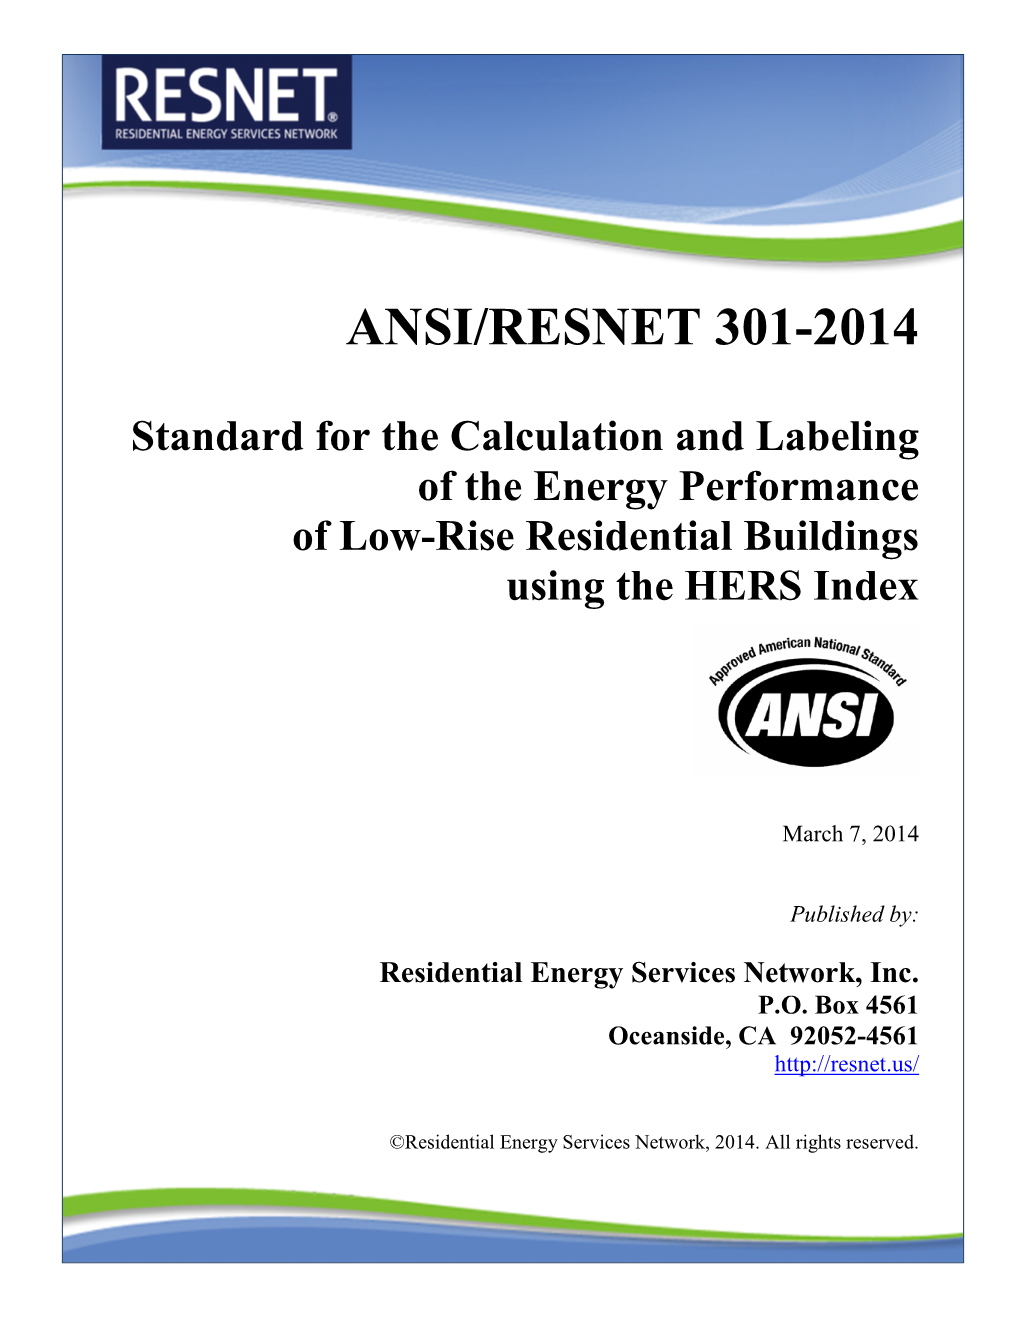 ANSI/RESNET 301-2014, Standard for the Calculation and Labeling of The